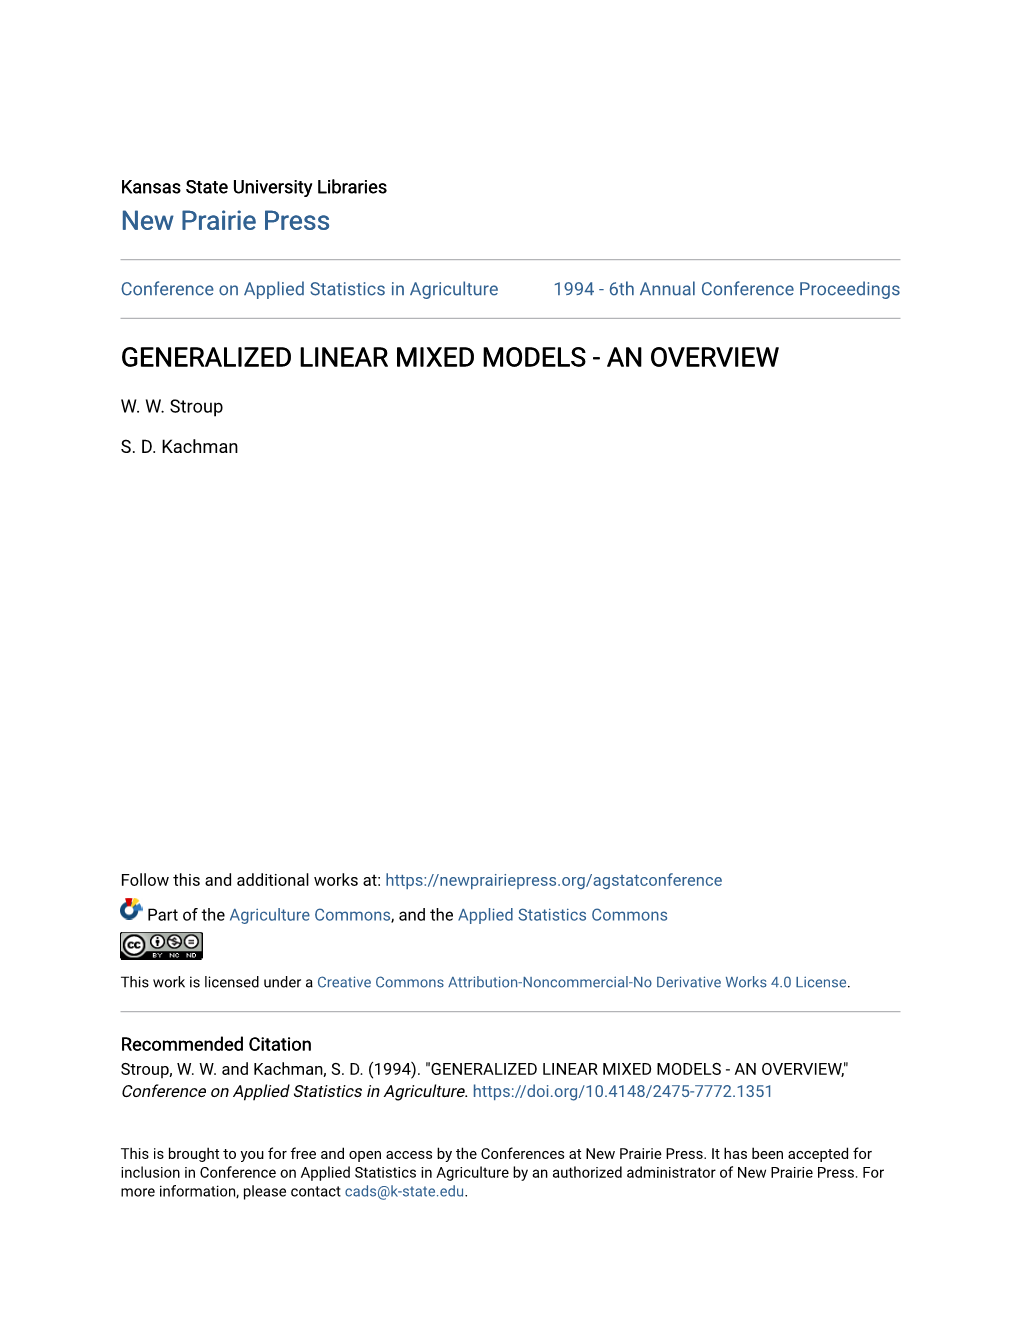 Generalized Linear Mixed Models - an Overview